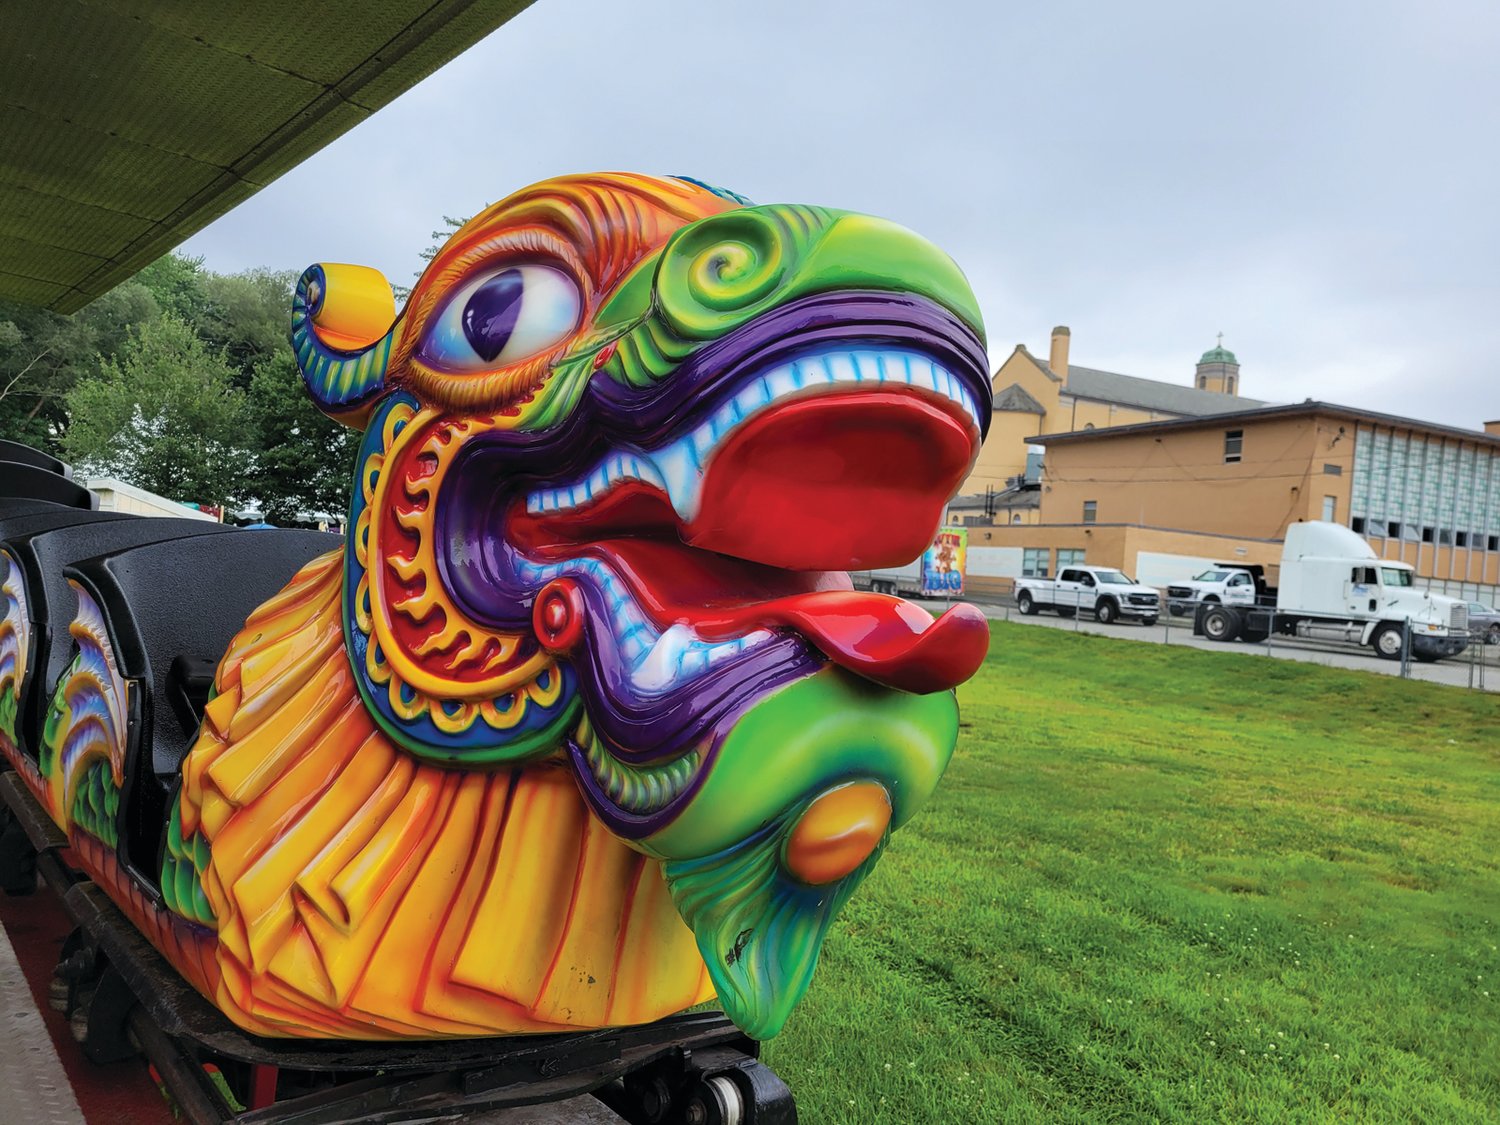 THE DRAGON AWAITS: Saint Rocco’s Feast was expected to kick off Thursday night and continue through this weekend. Earlier this week, the Orient Express Chinese Dragon mini-coaster sat patiently awaiting its first eager riders.